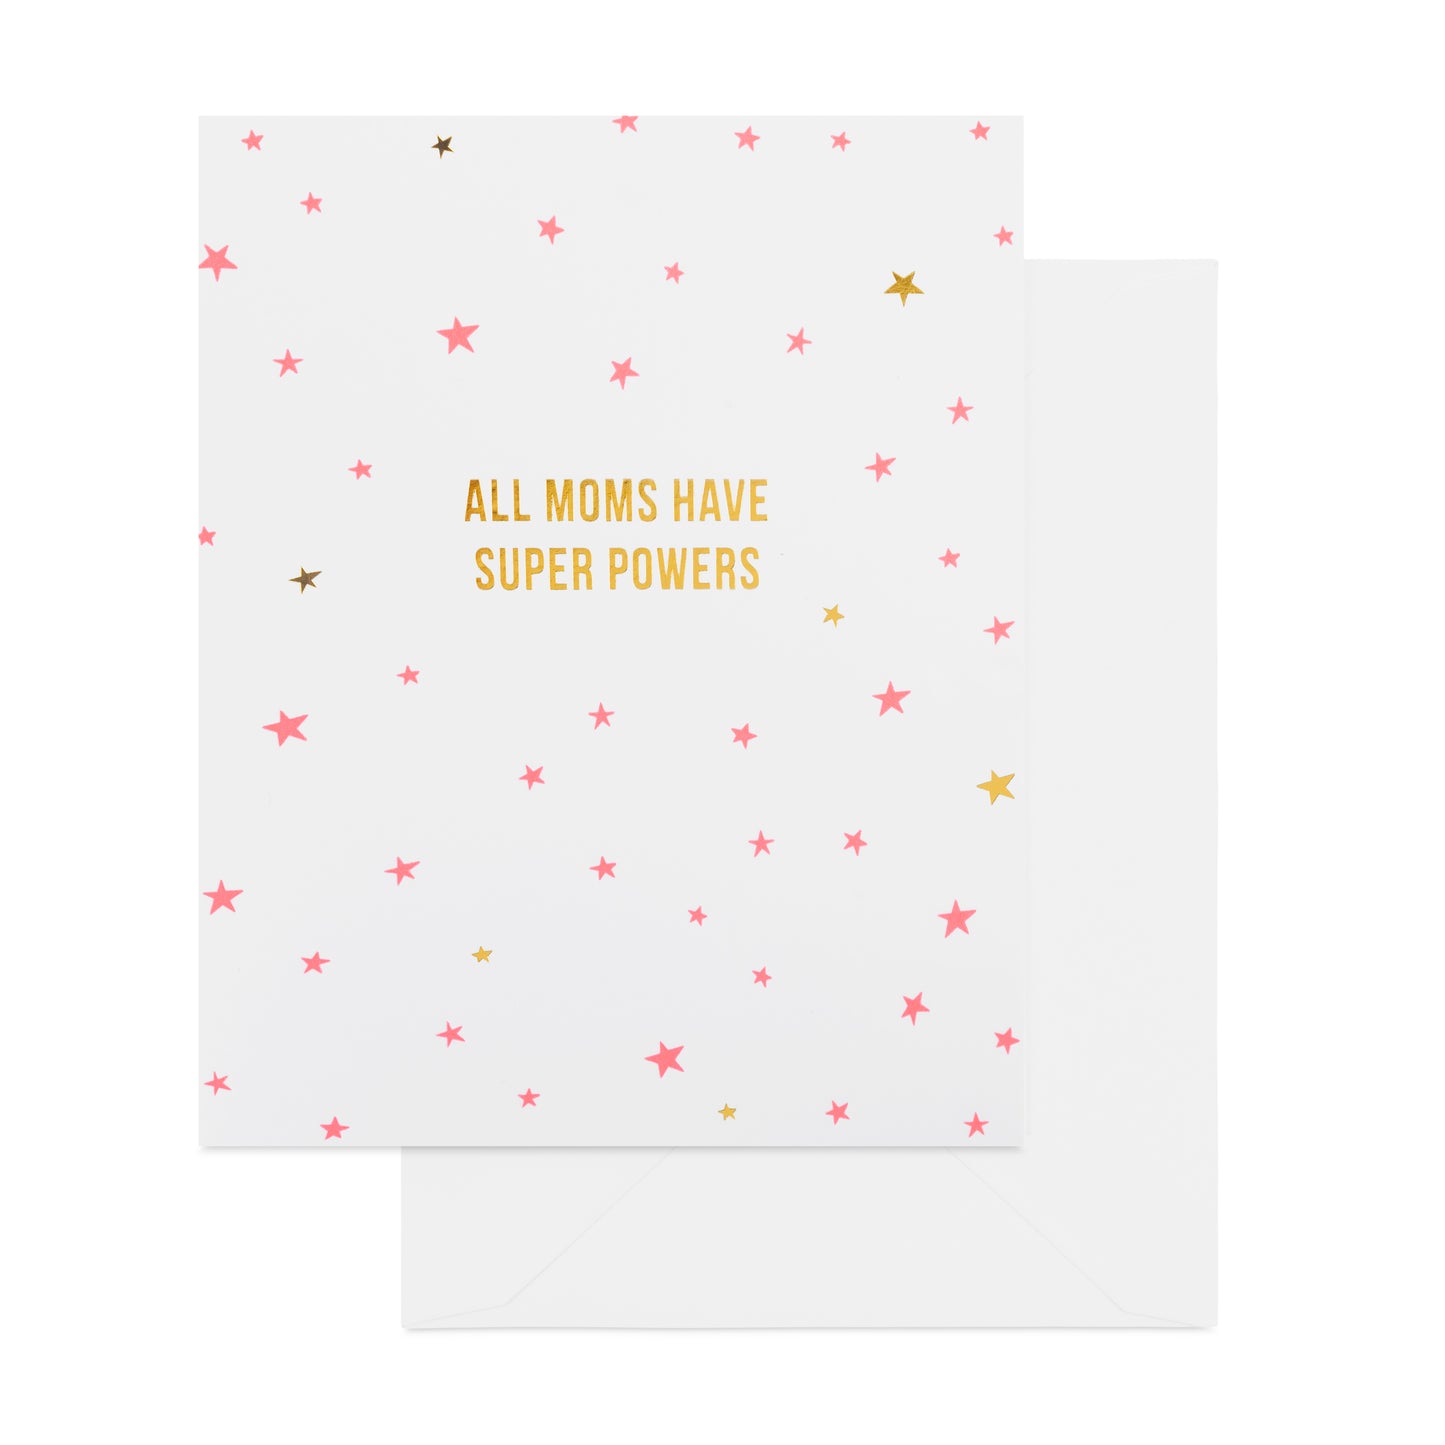 Pink and gold star mother's day card printed with all moms have super powers